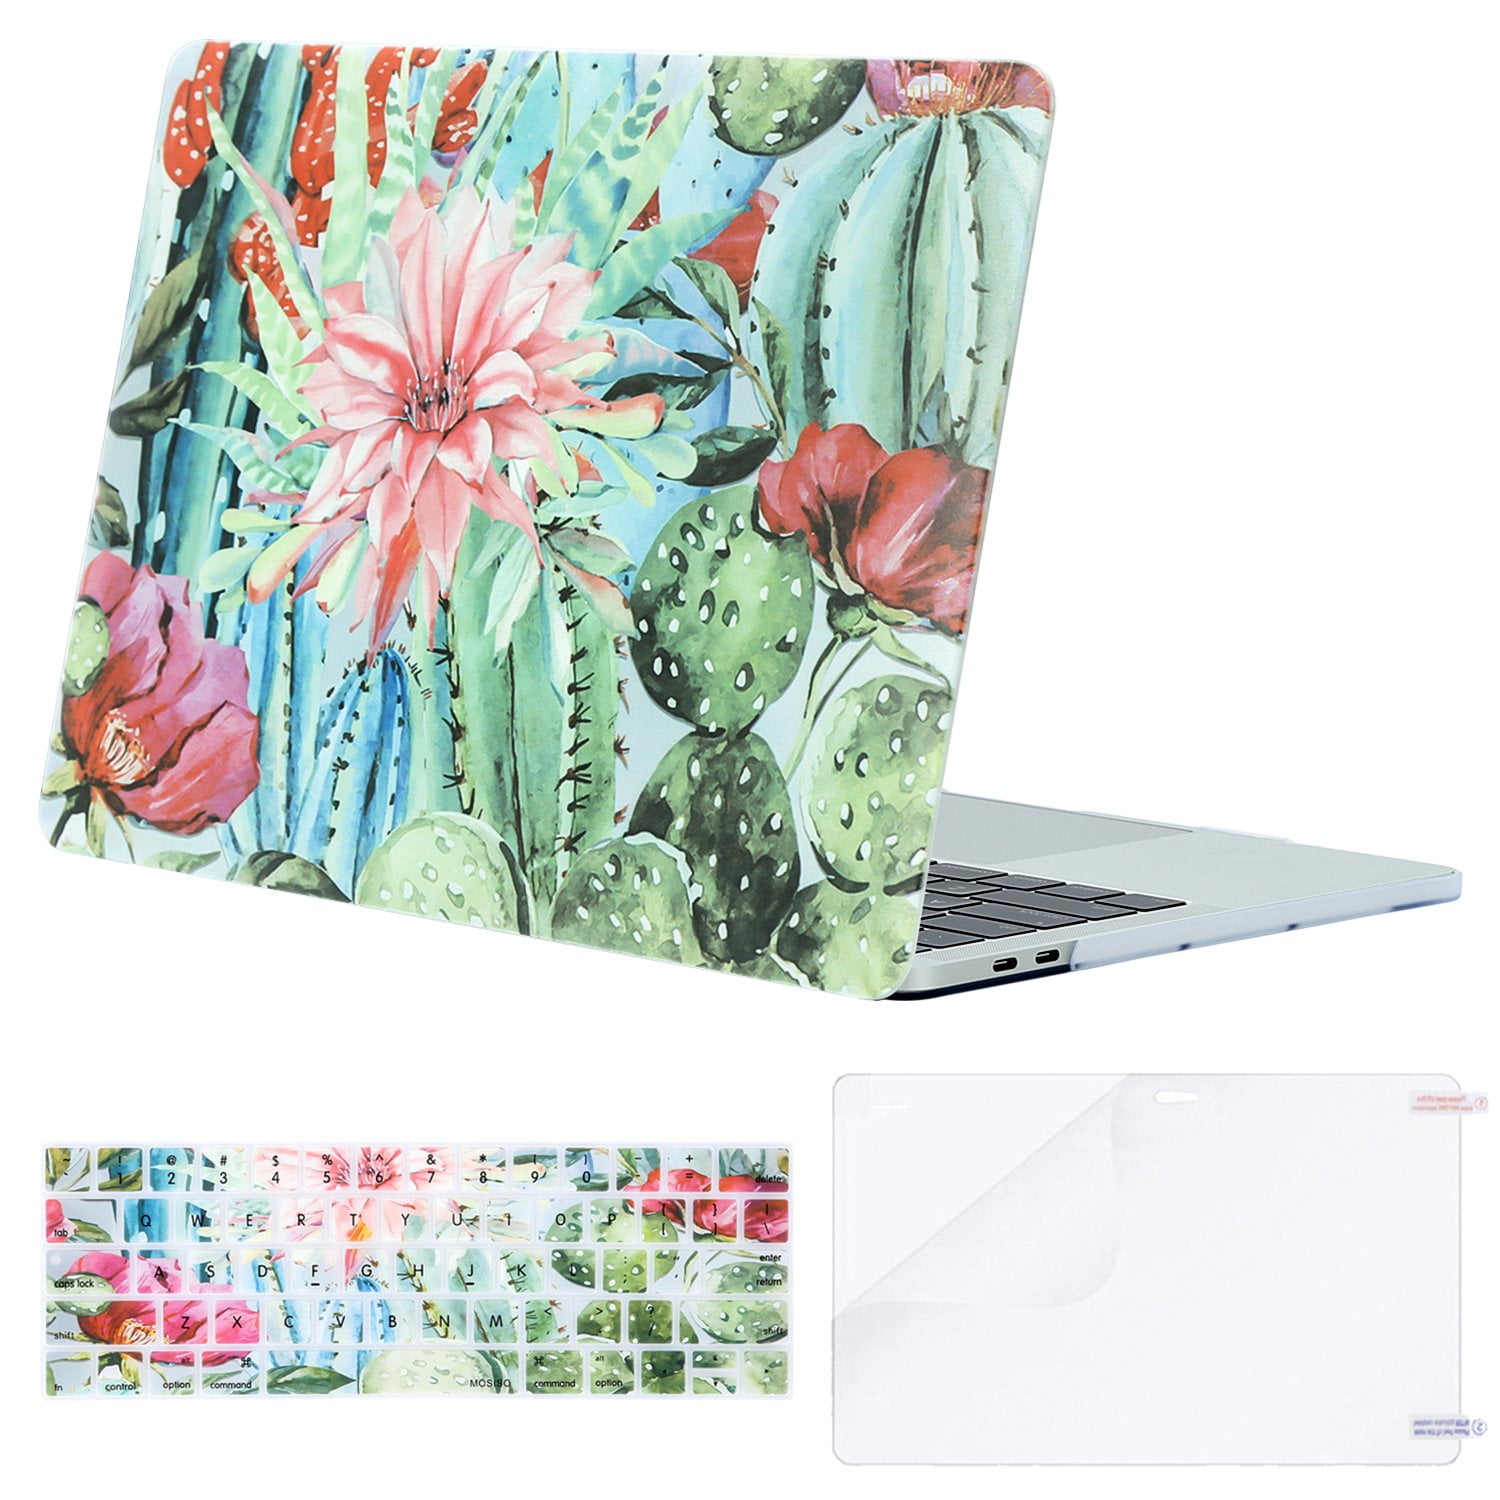 Macbook New Pro 13 Case 2018&2017&2016 Release A1989/A1706/A1708 Rubberized Hard Shell Case Cover+Keyboard Cover For MacBook Pro 13 W/Without Touch Bar & Touch ID Peony Flower